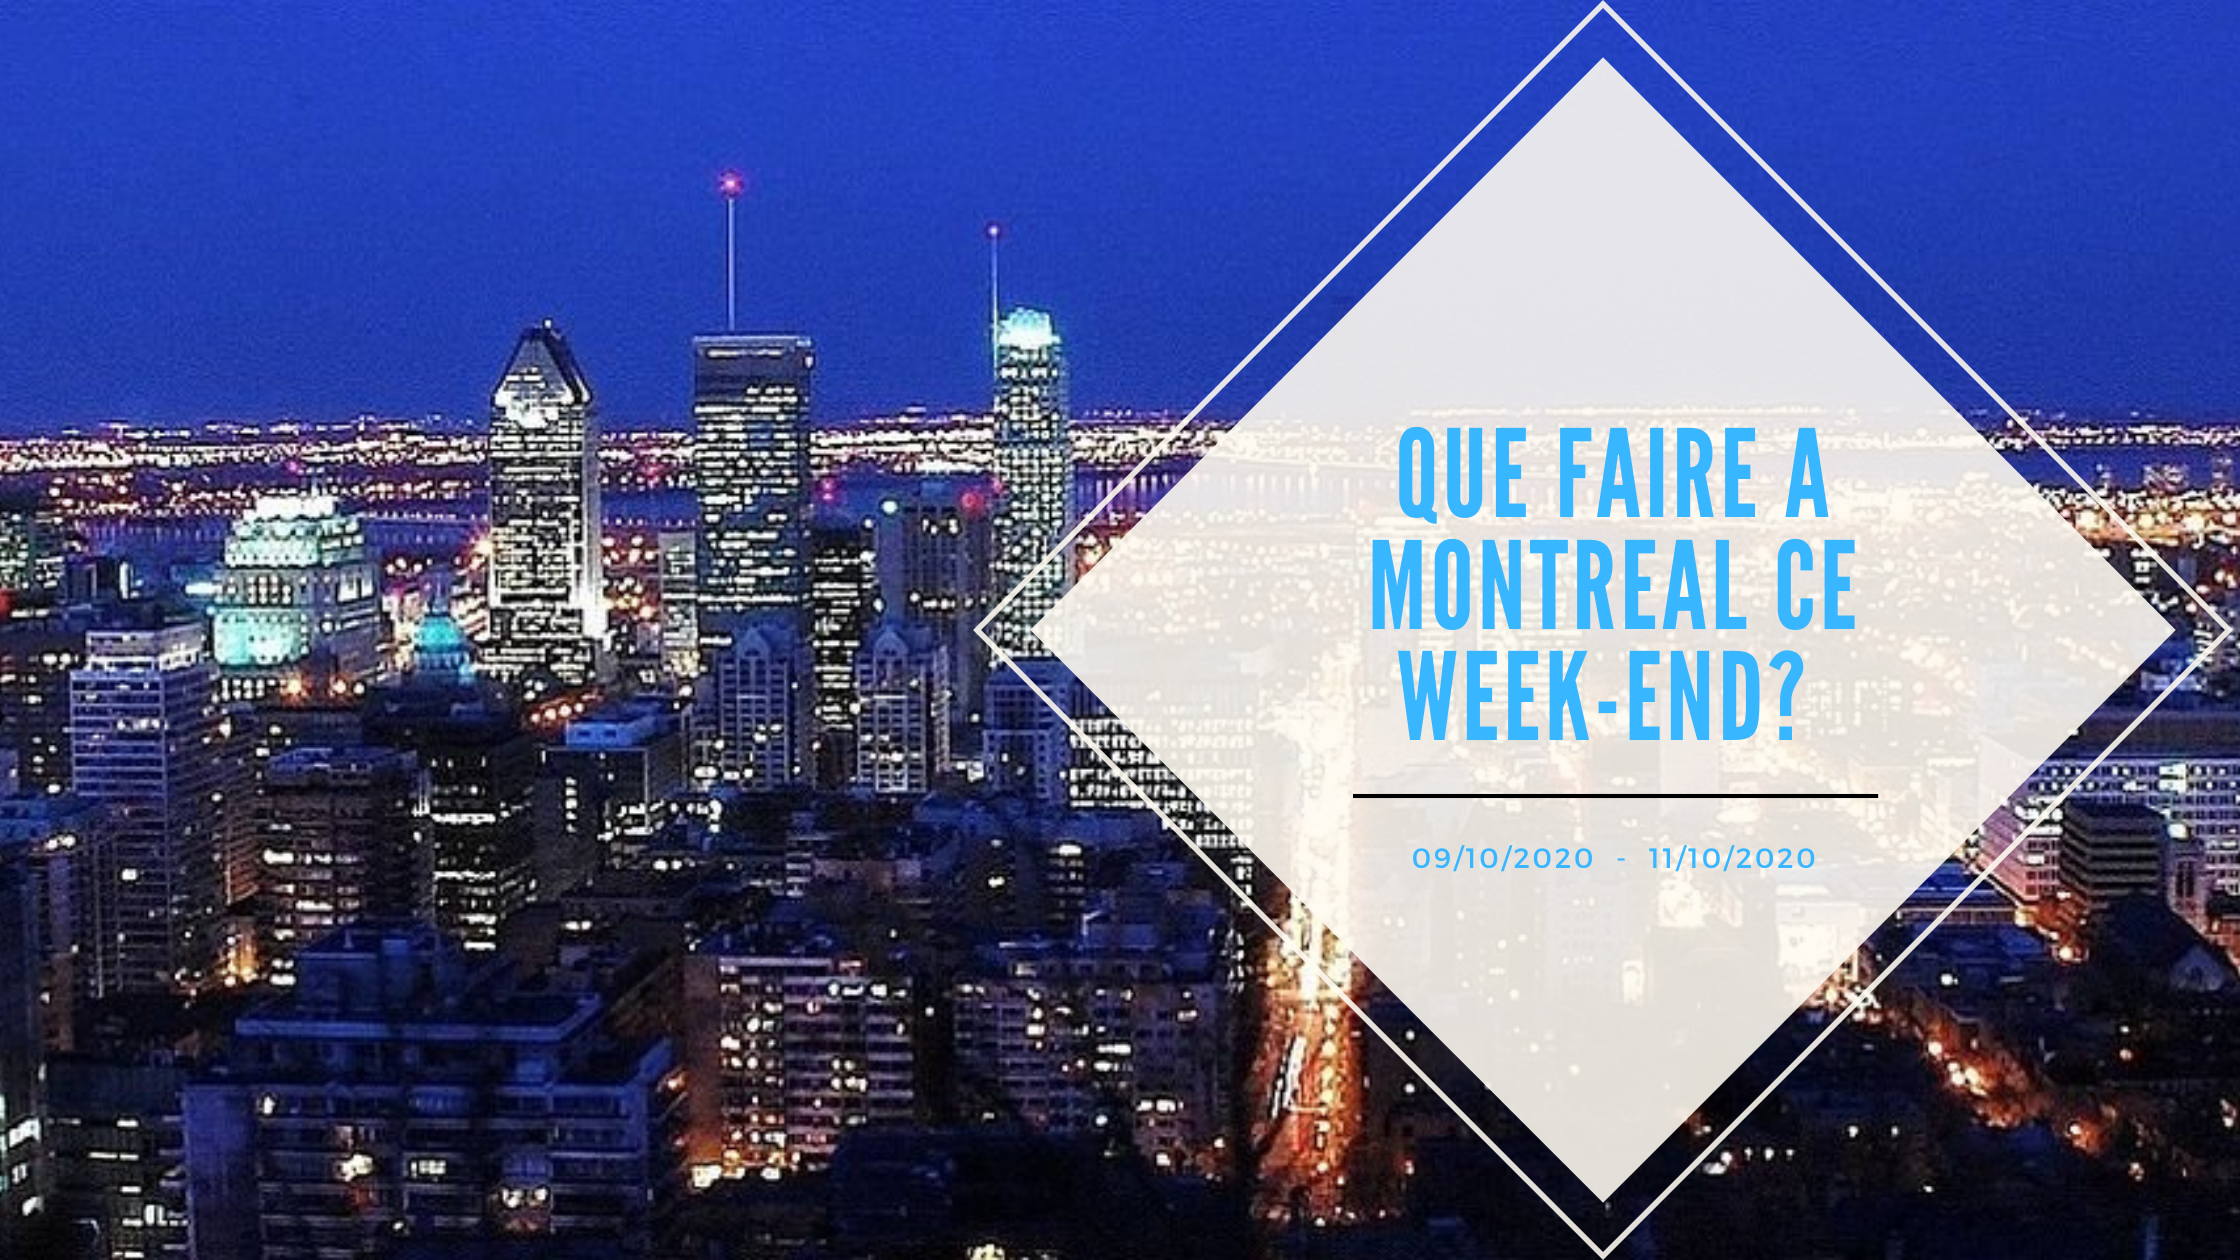 What to do this weekend in Montreal on October 9, 10 and 11, 2020?